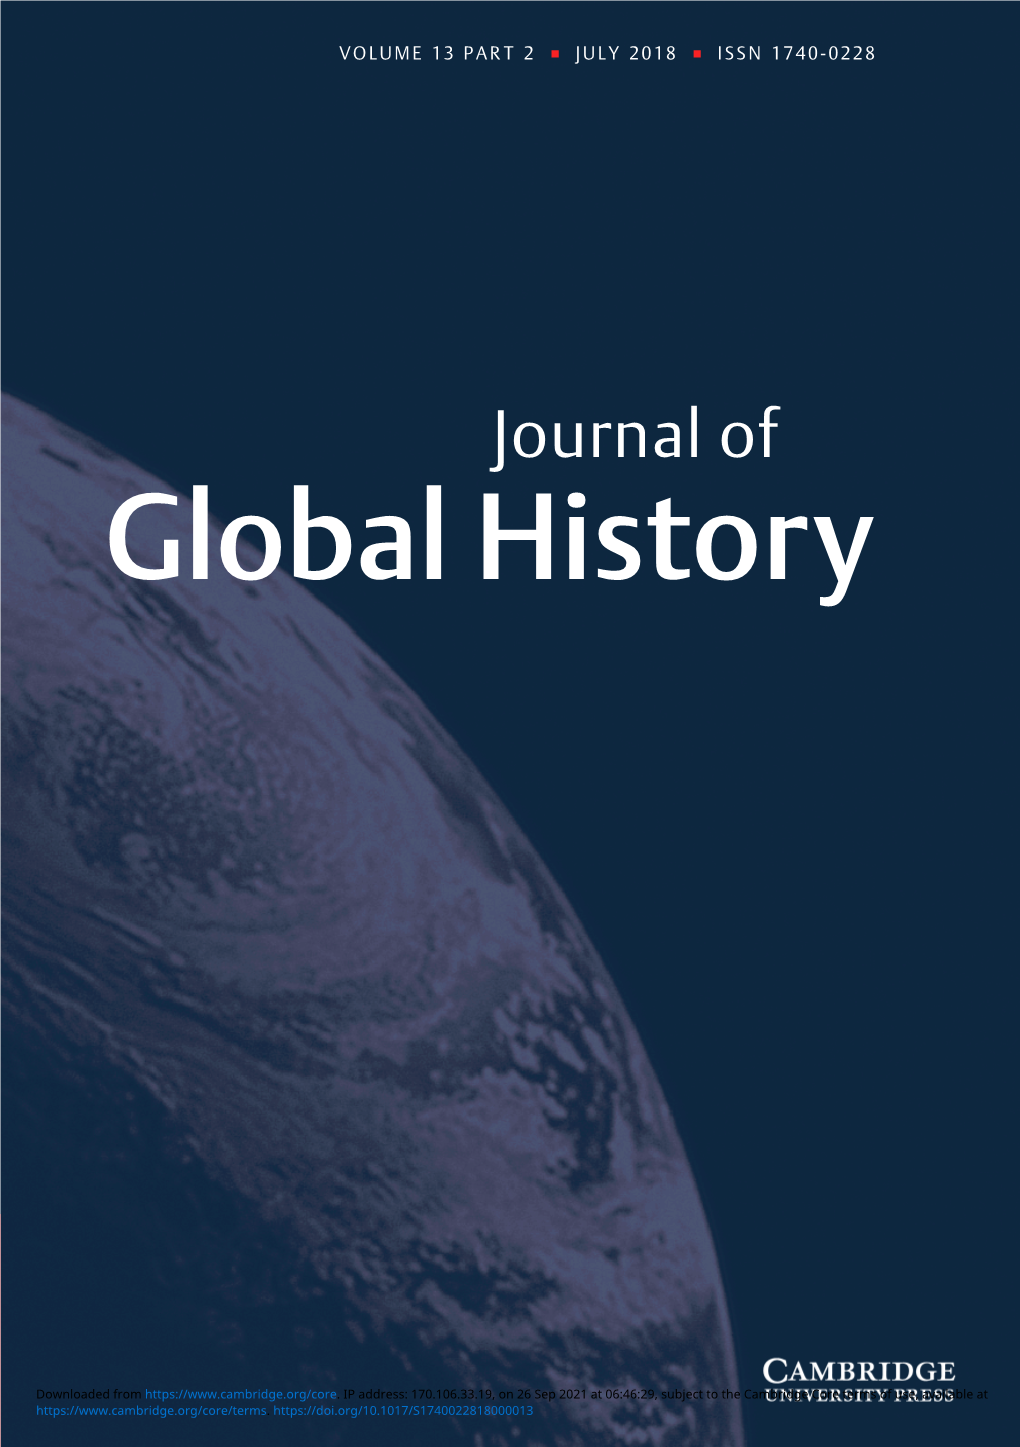 Global History VOLUME 13 PART 2 ᭿ JULY 2018 ᭿ ISSN 1740-0228 Global History